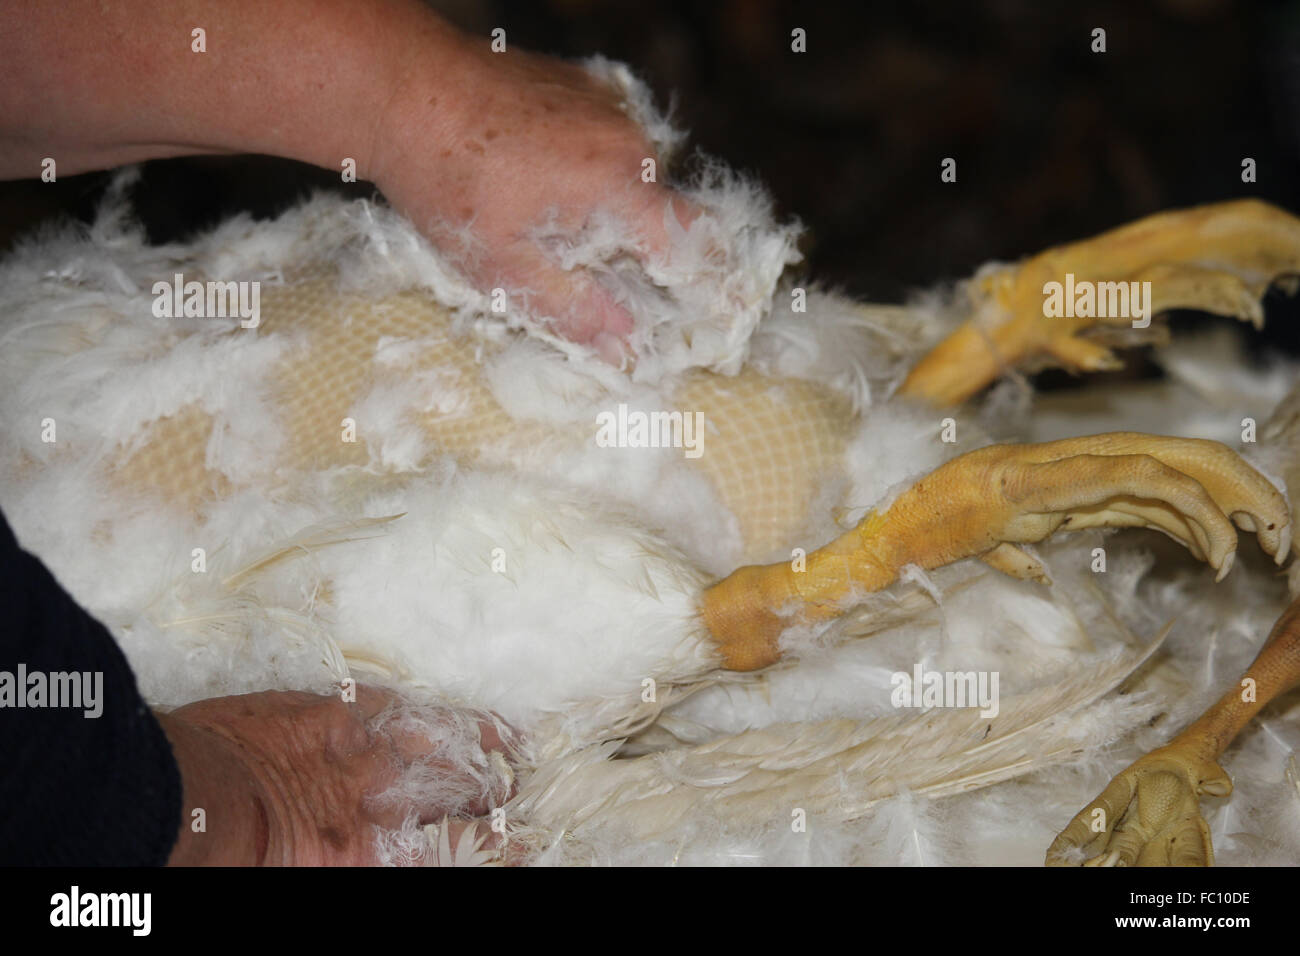 to pluck the goose Stock Photo